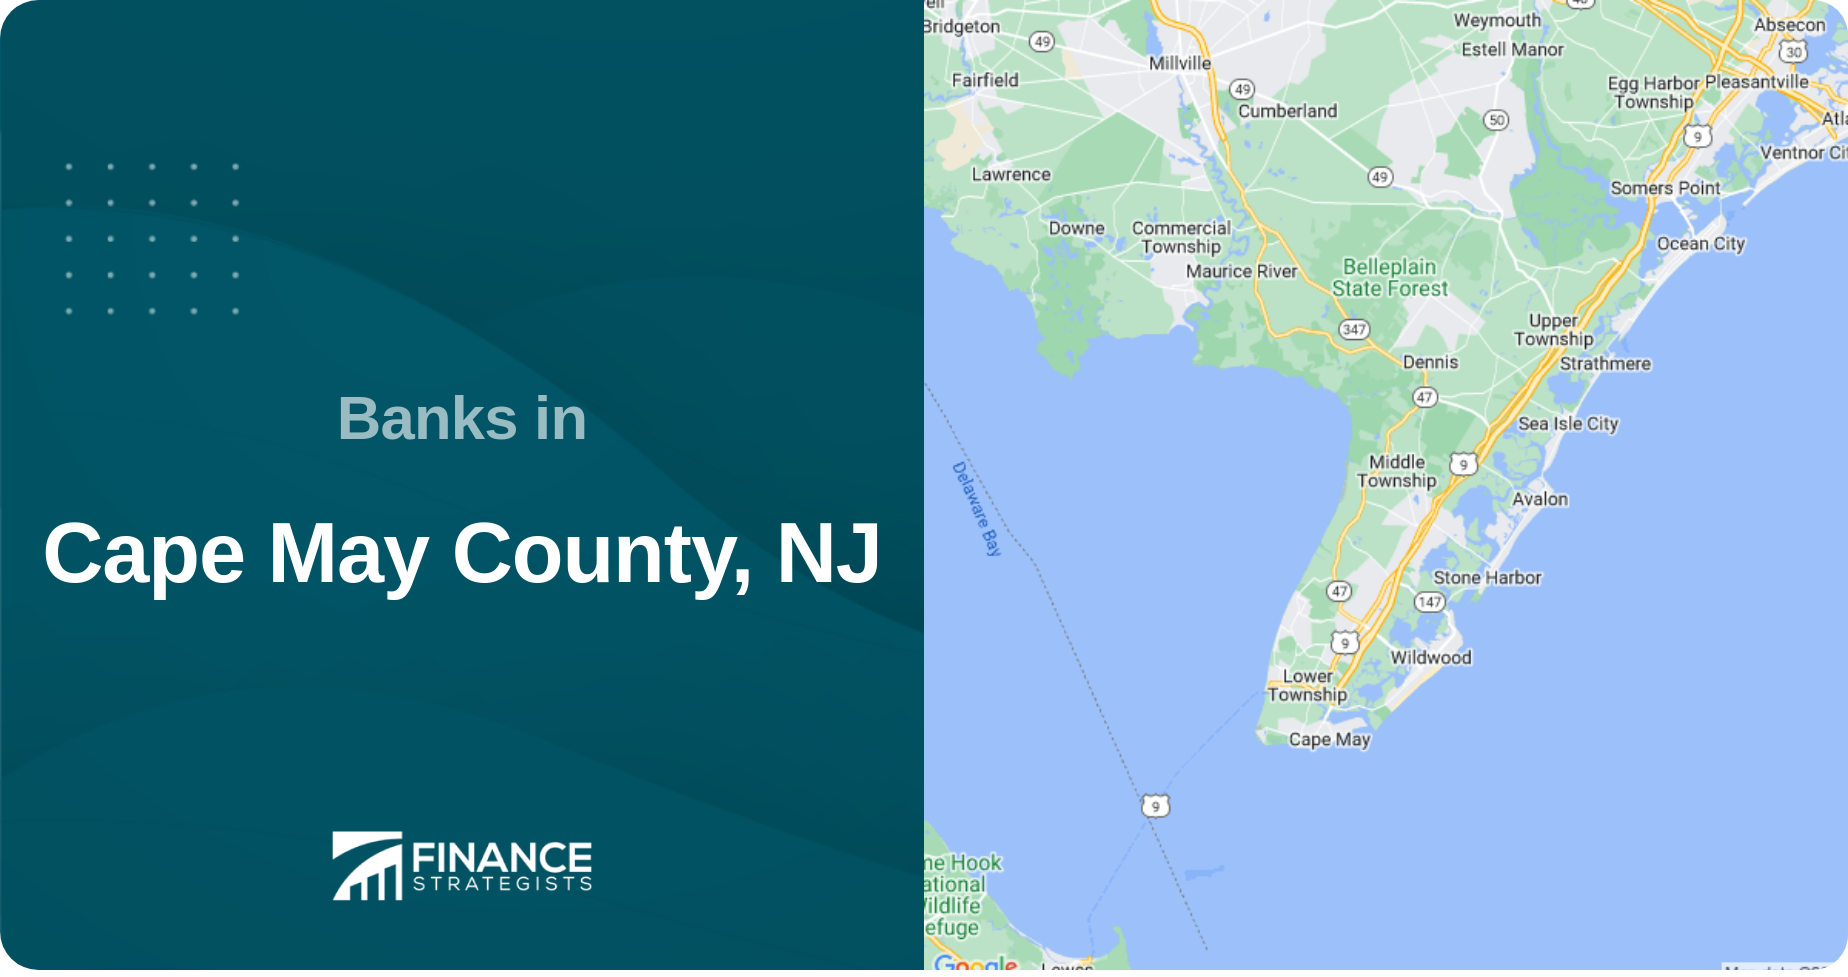 Banks in Cape May County, NJ